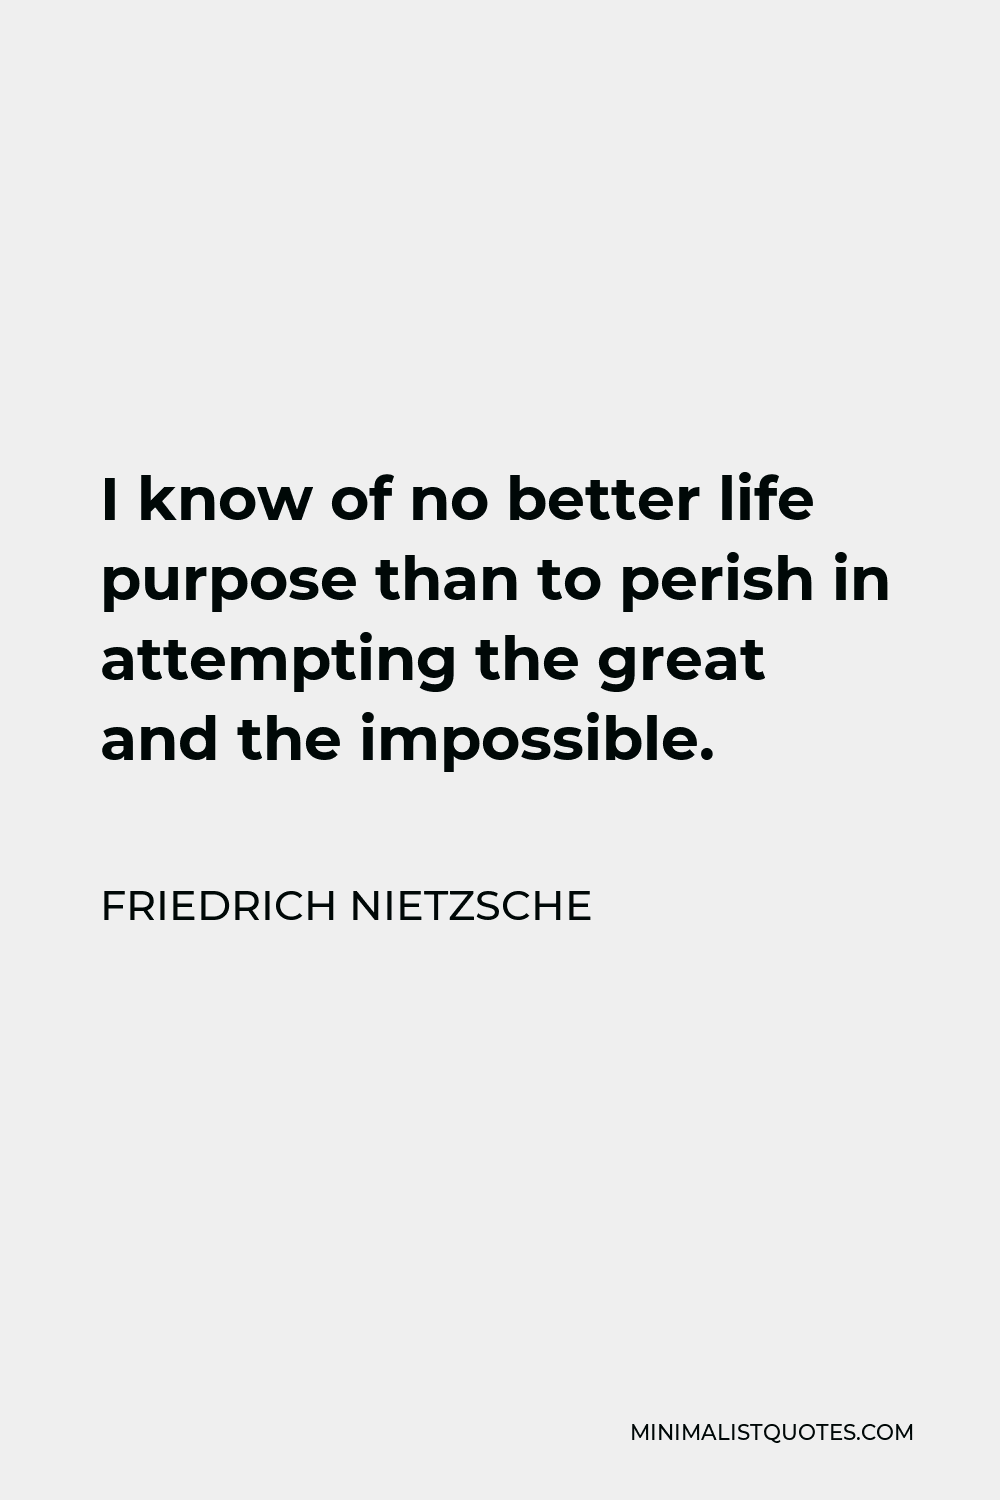 Friedrich Nietzsche Quote - I know of no better life purpose than to perish in attempting the great and the impossible.